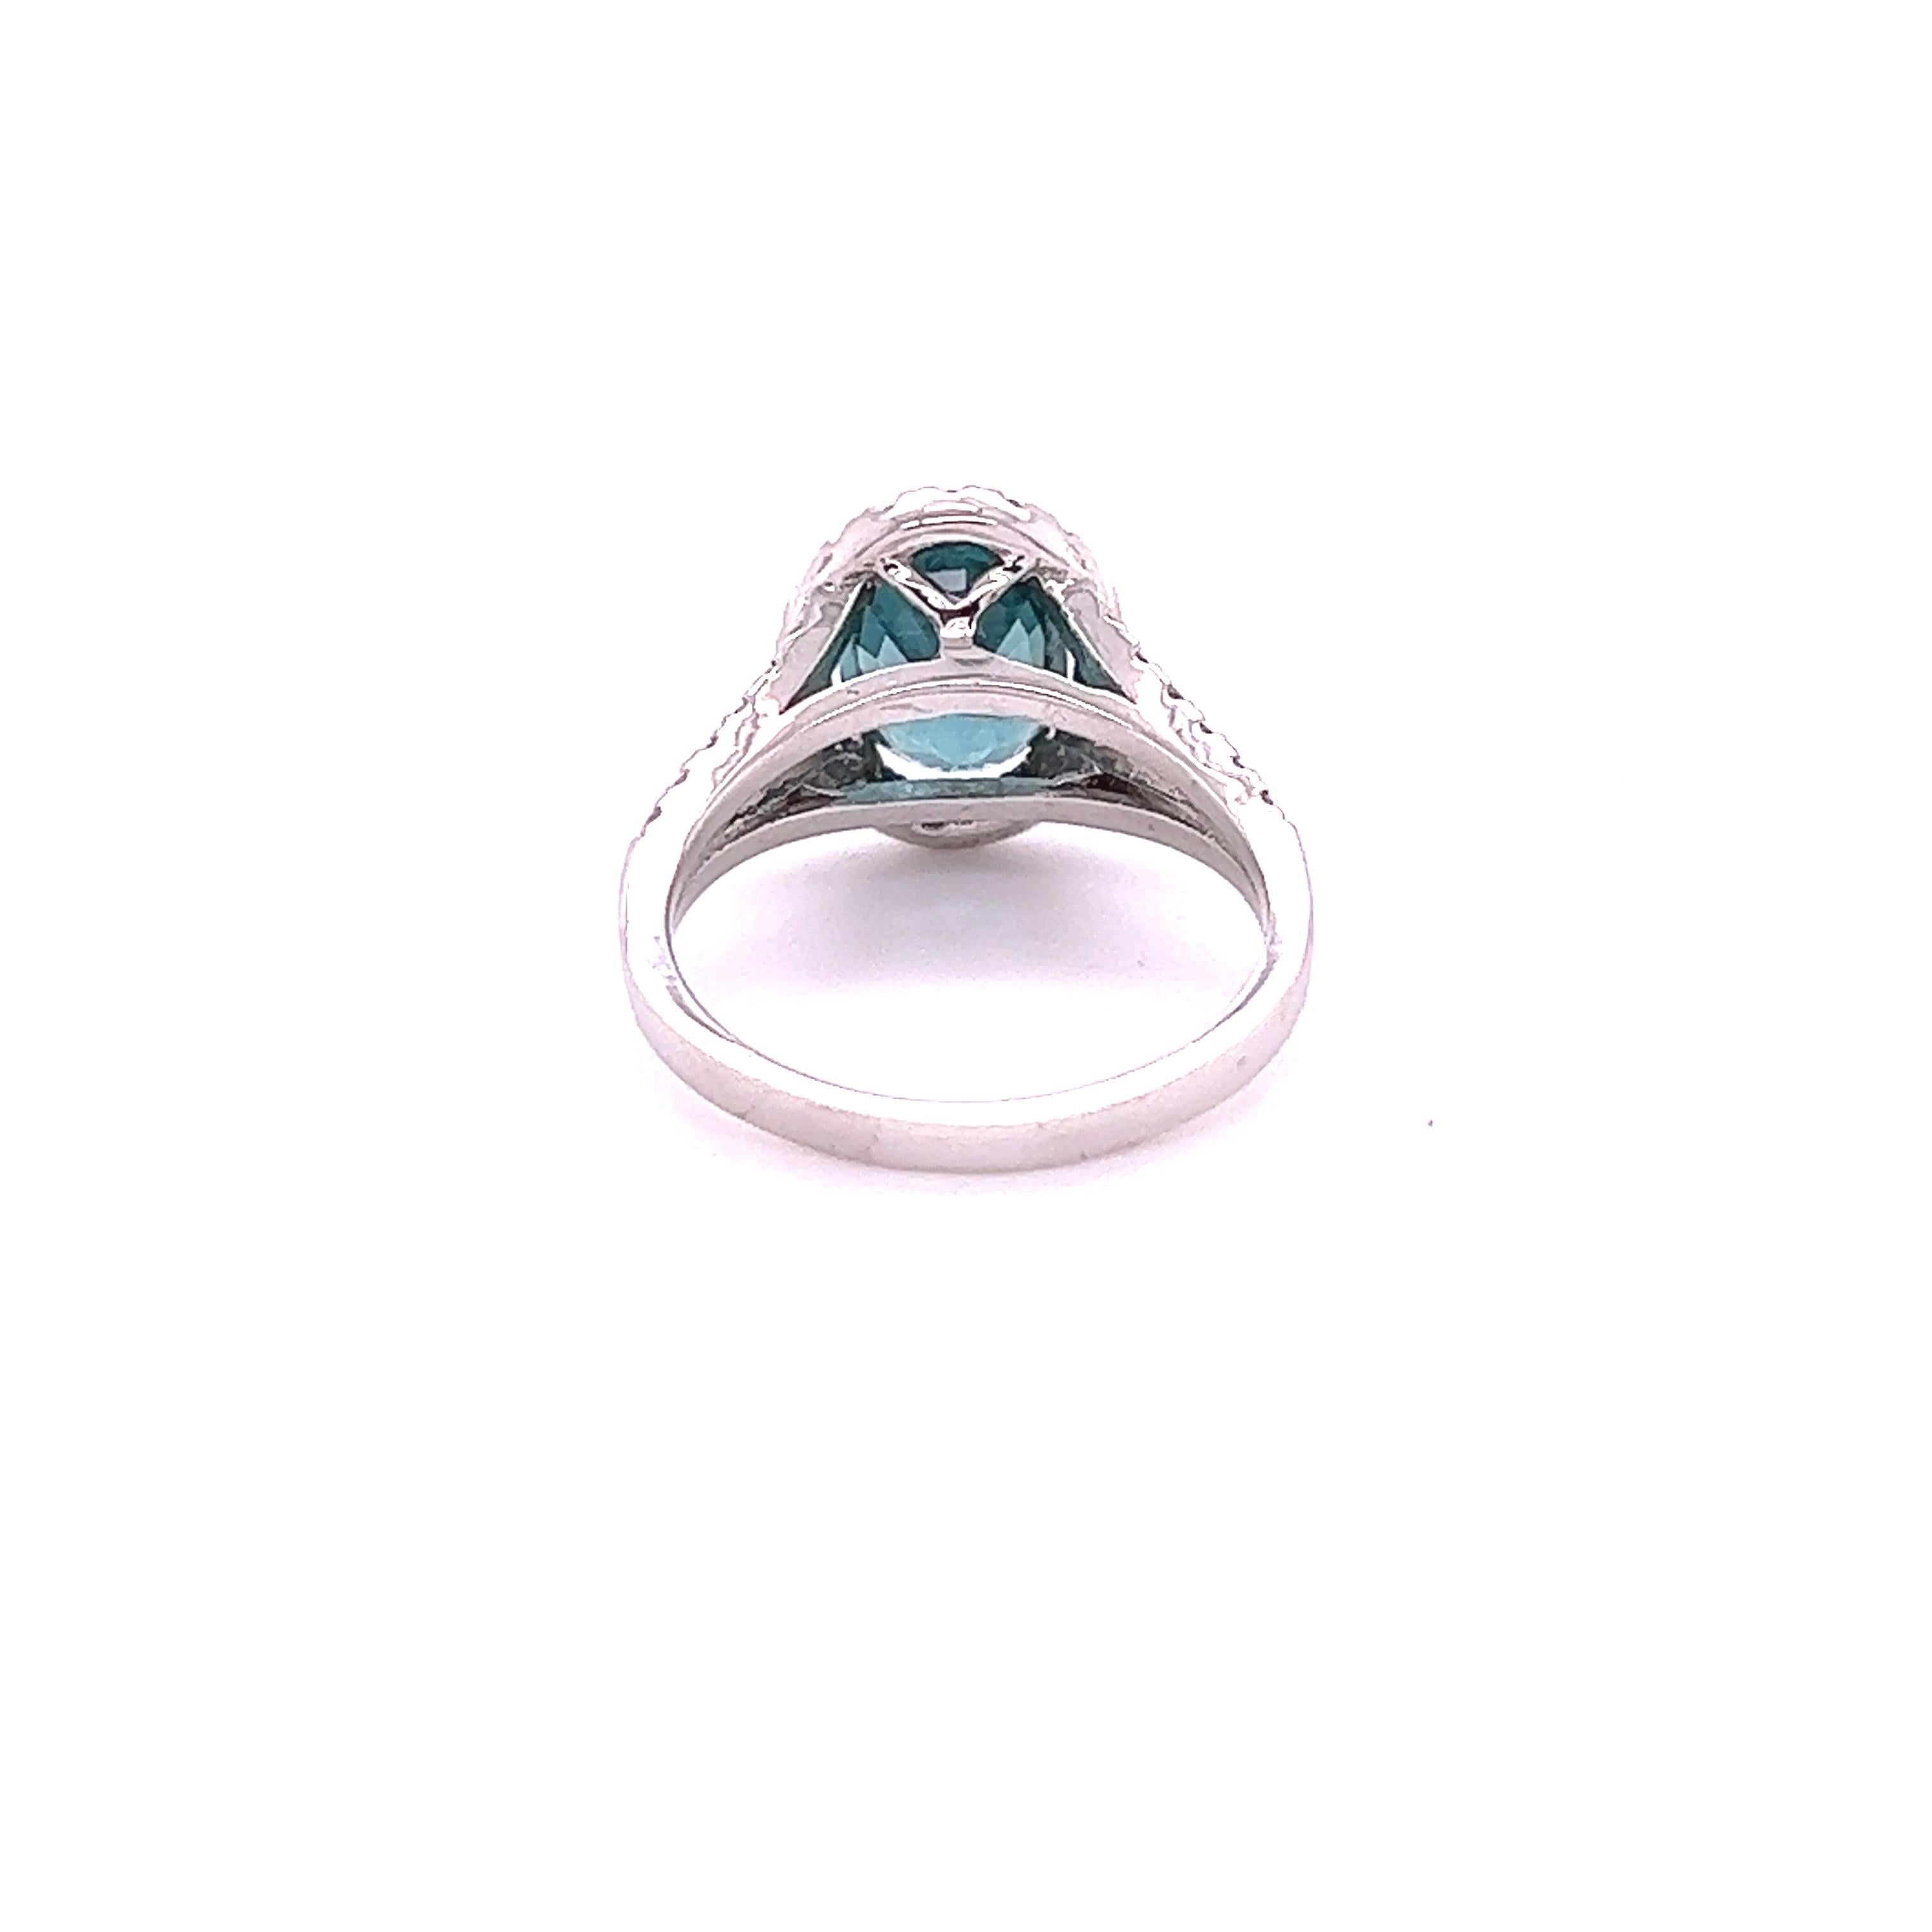 Oval Cut 2.62 Carat Apatite Diamond White Gold Ring For Sale